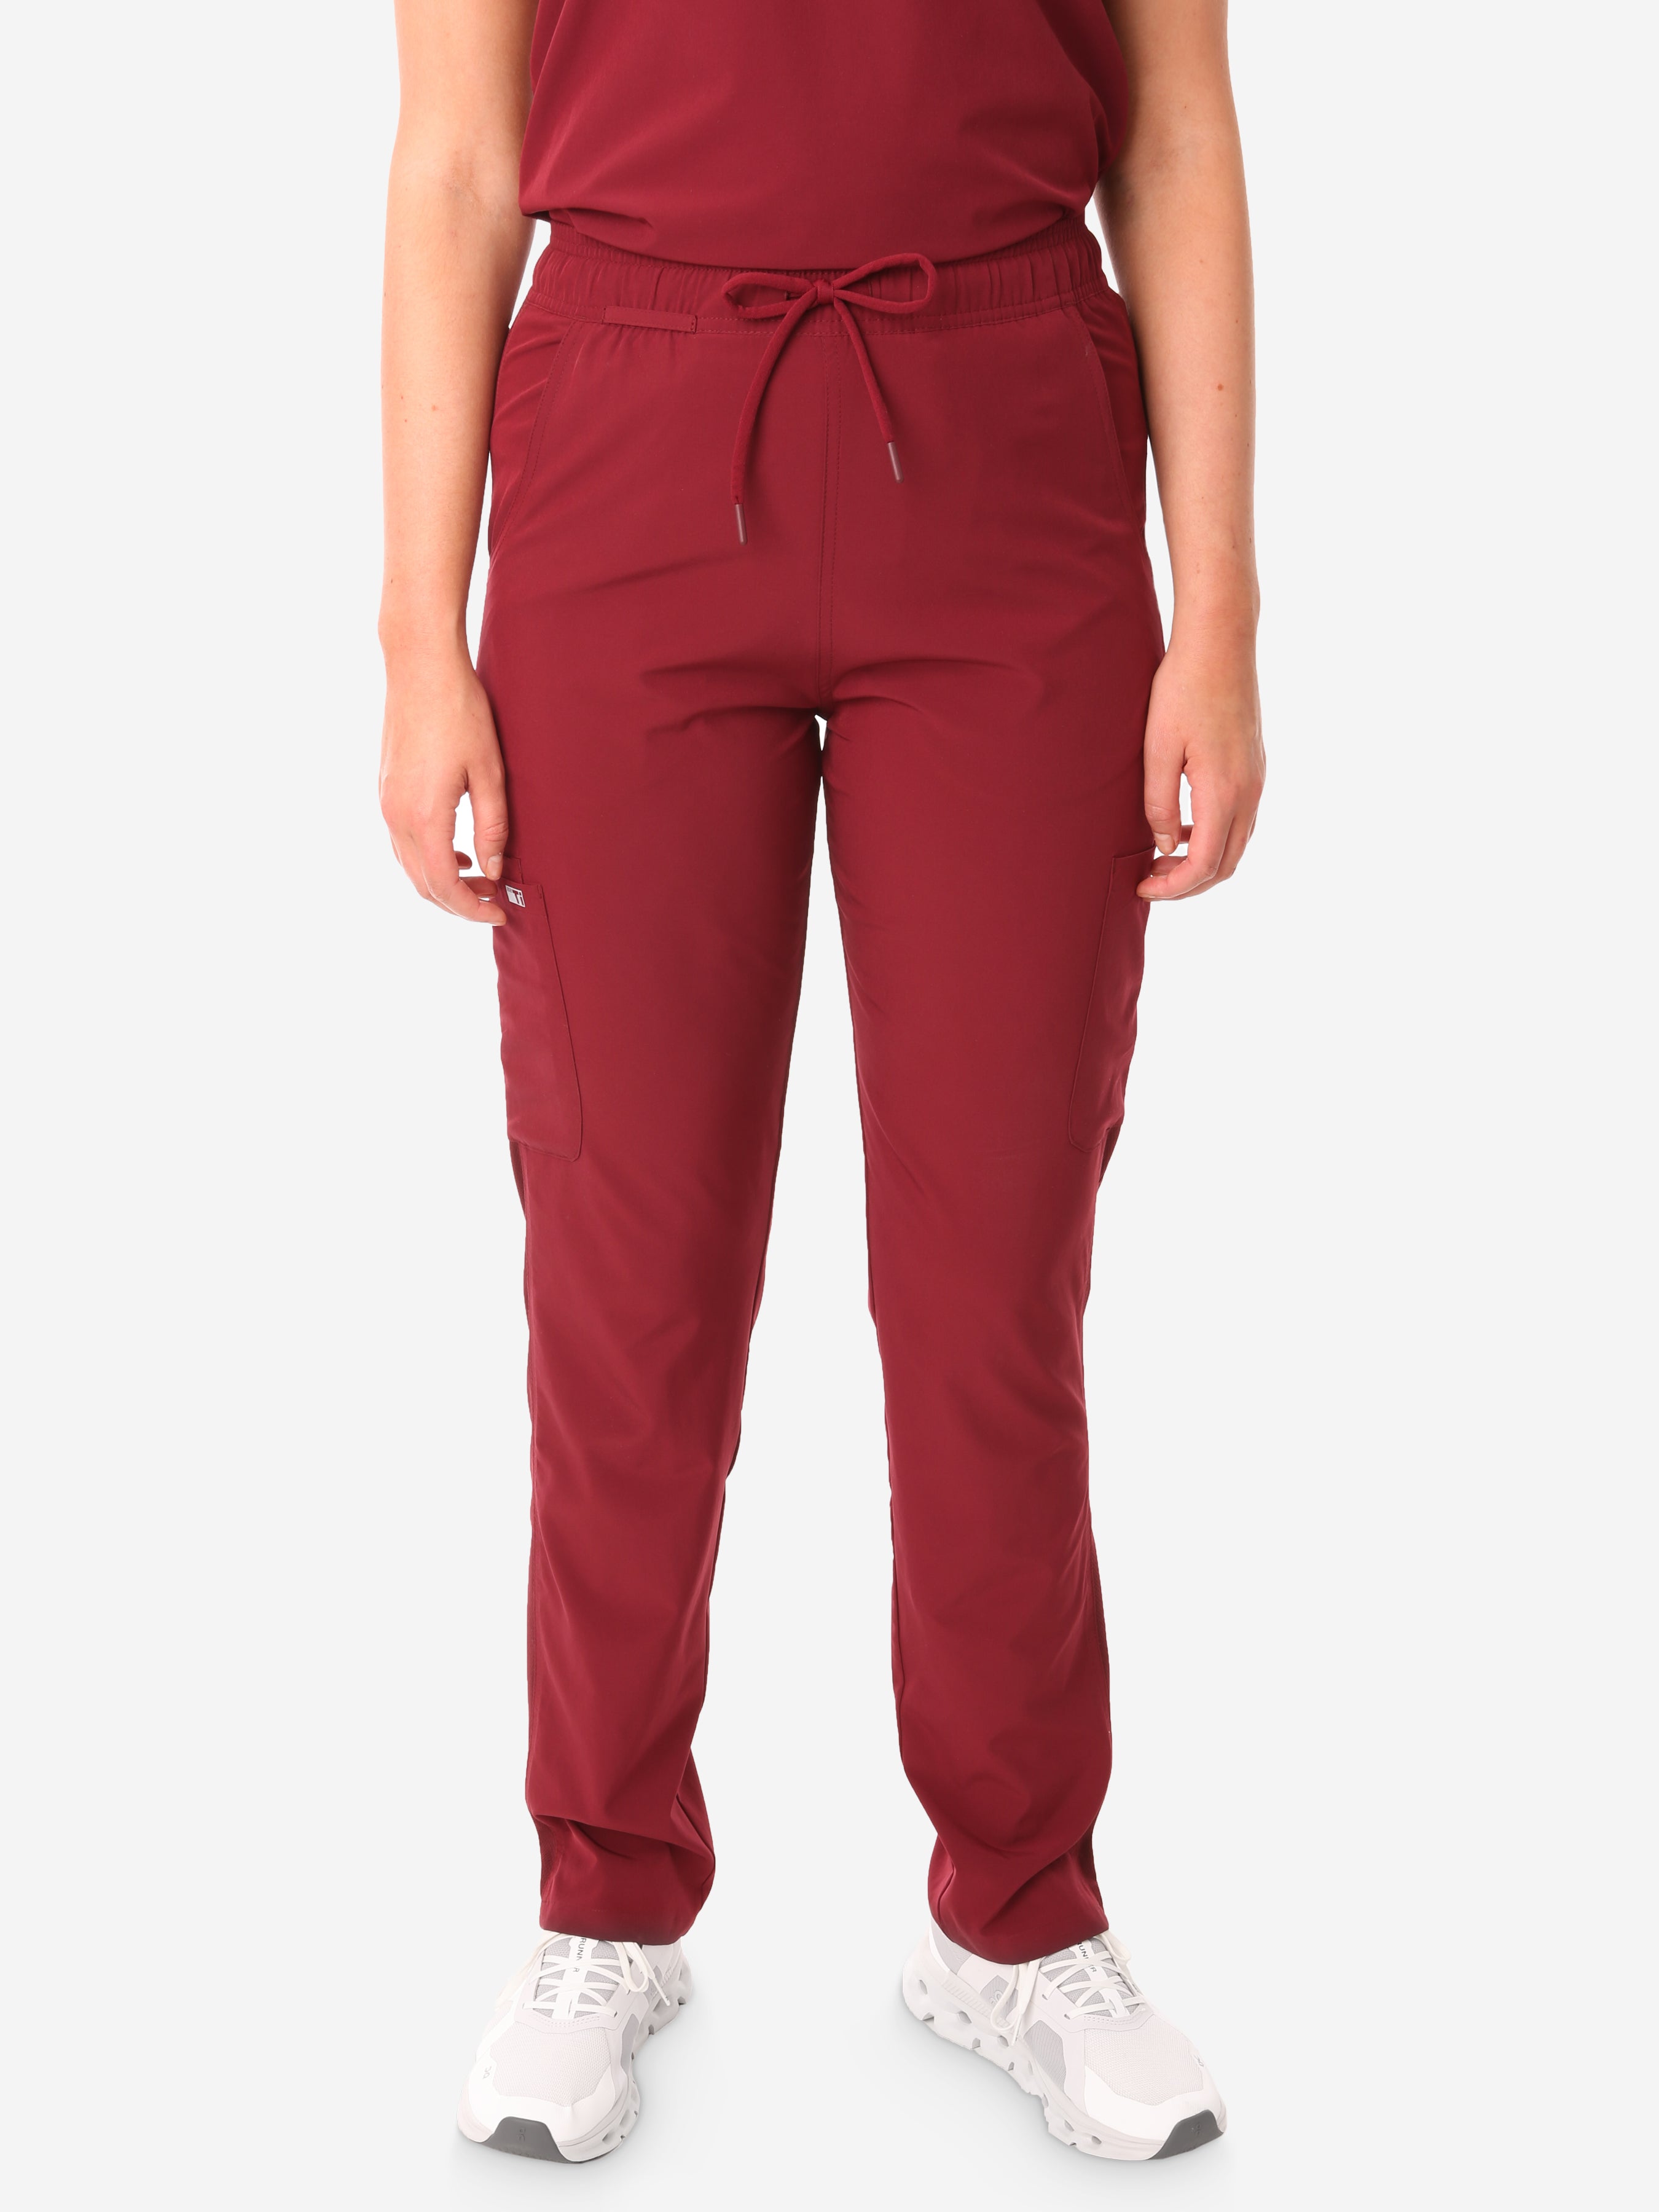 TiScrubs Bold Burgundy Women&#39;s Stretch 9-Pocket Pants Front View Pants Only